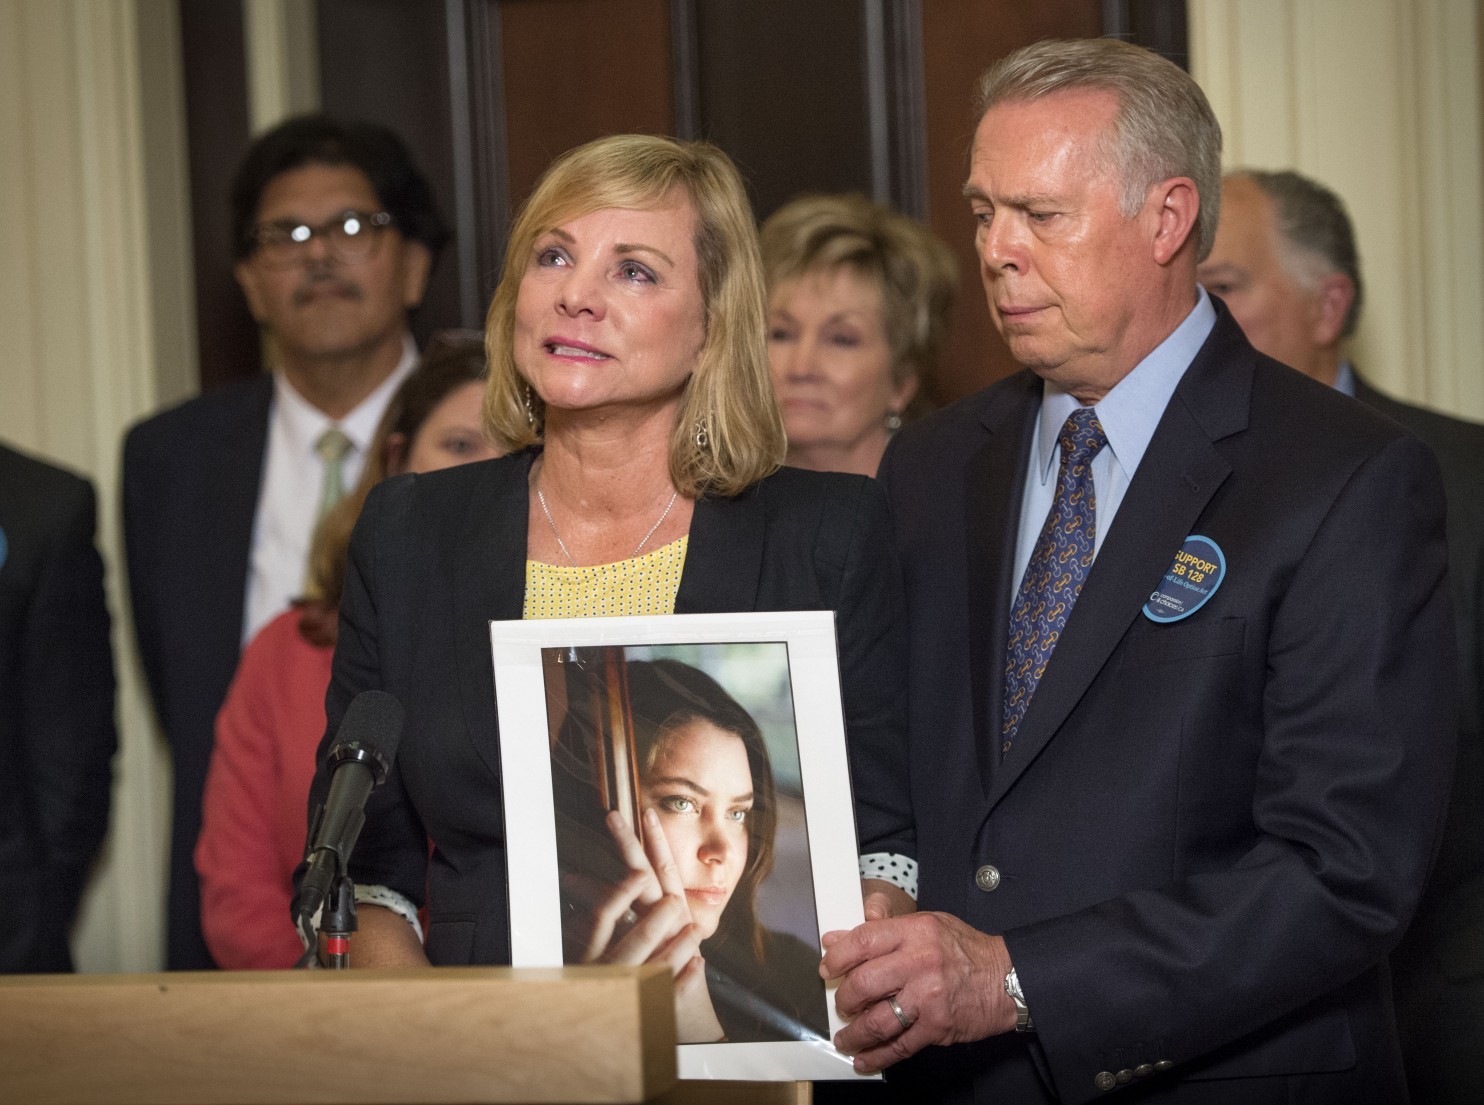 The mother of Brittany Maynard after the bill passed the California Senate.